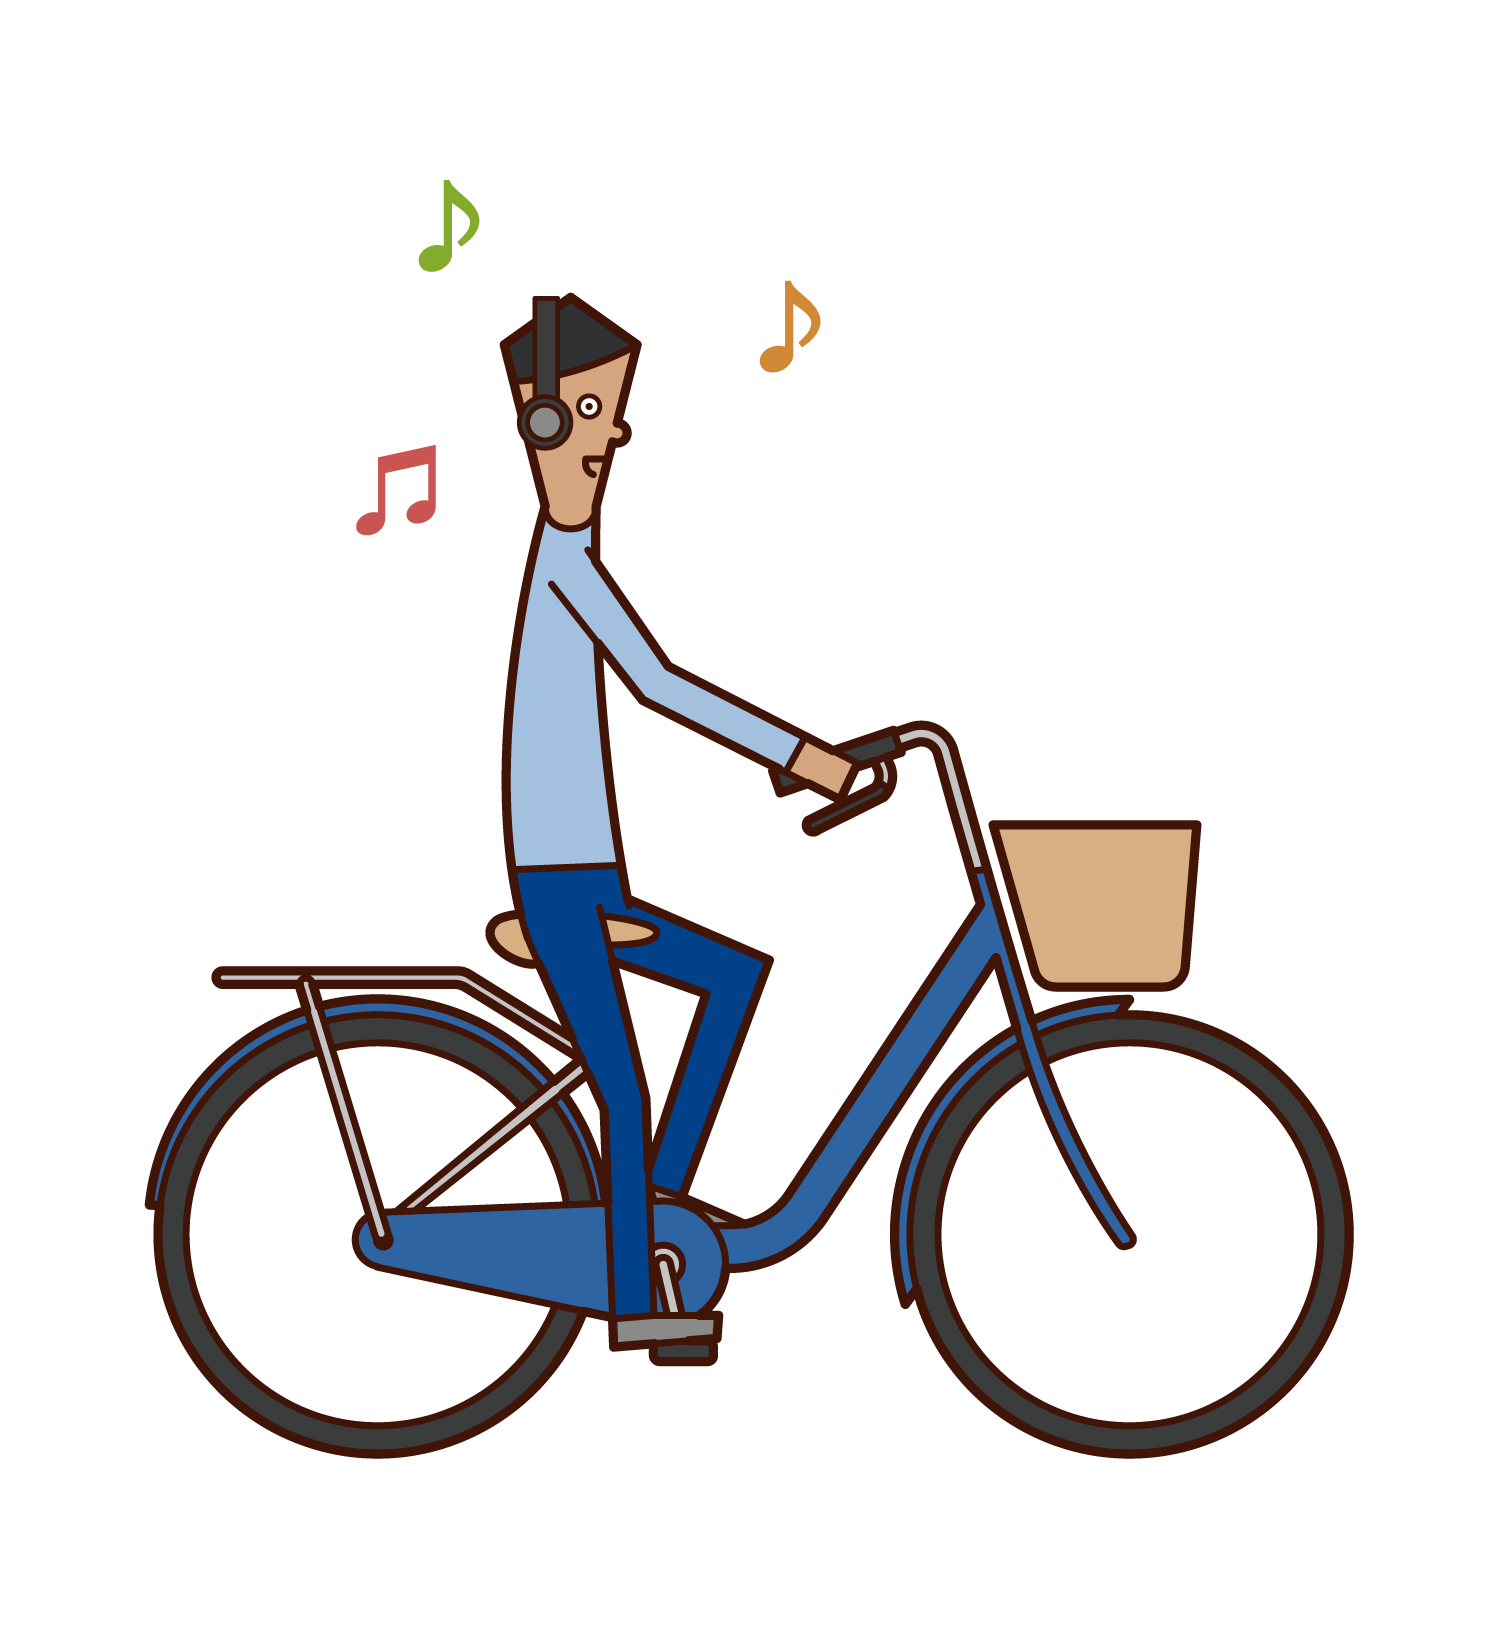 Illustration of a man who listens to music but rides a bicycle